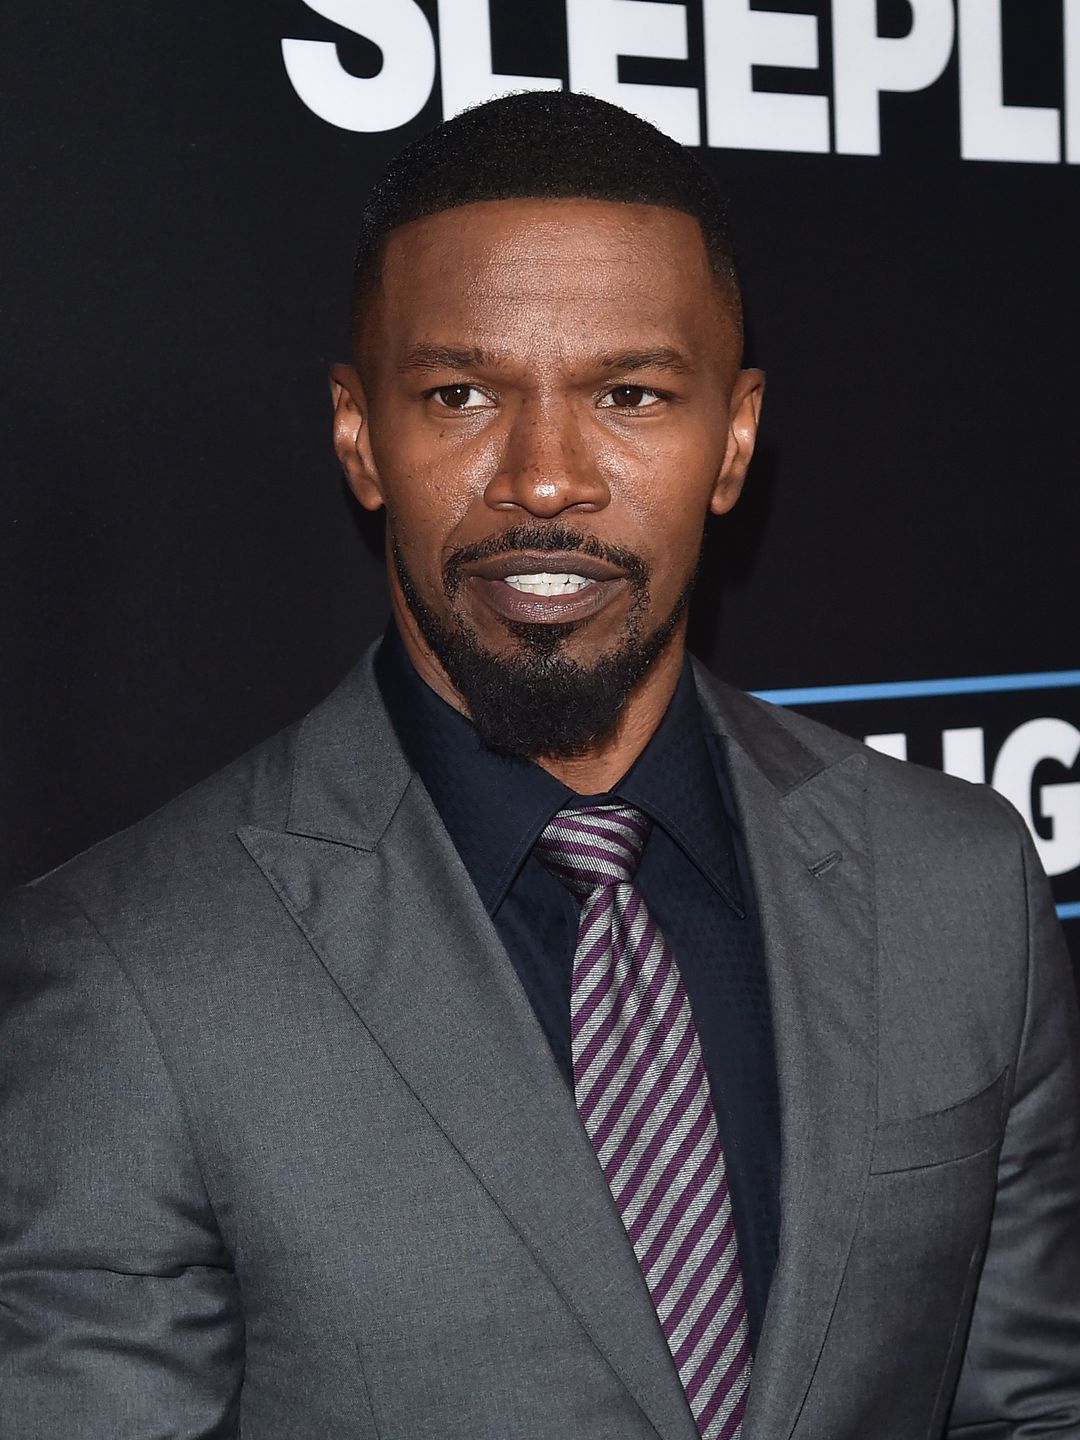 Jamie Foxx young age